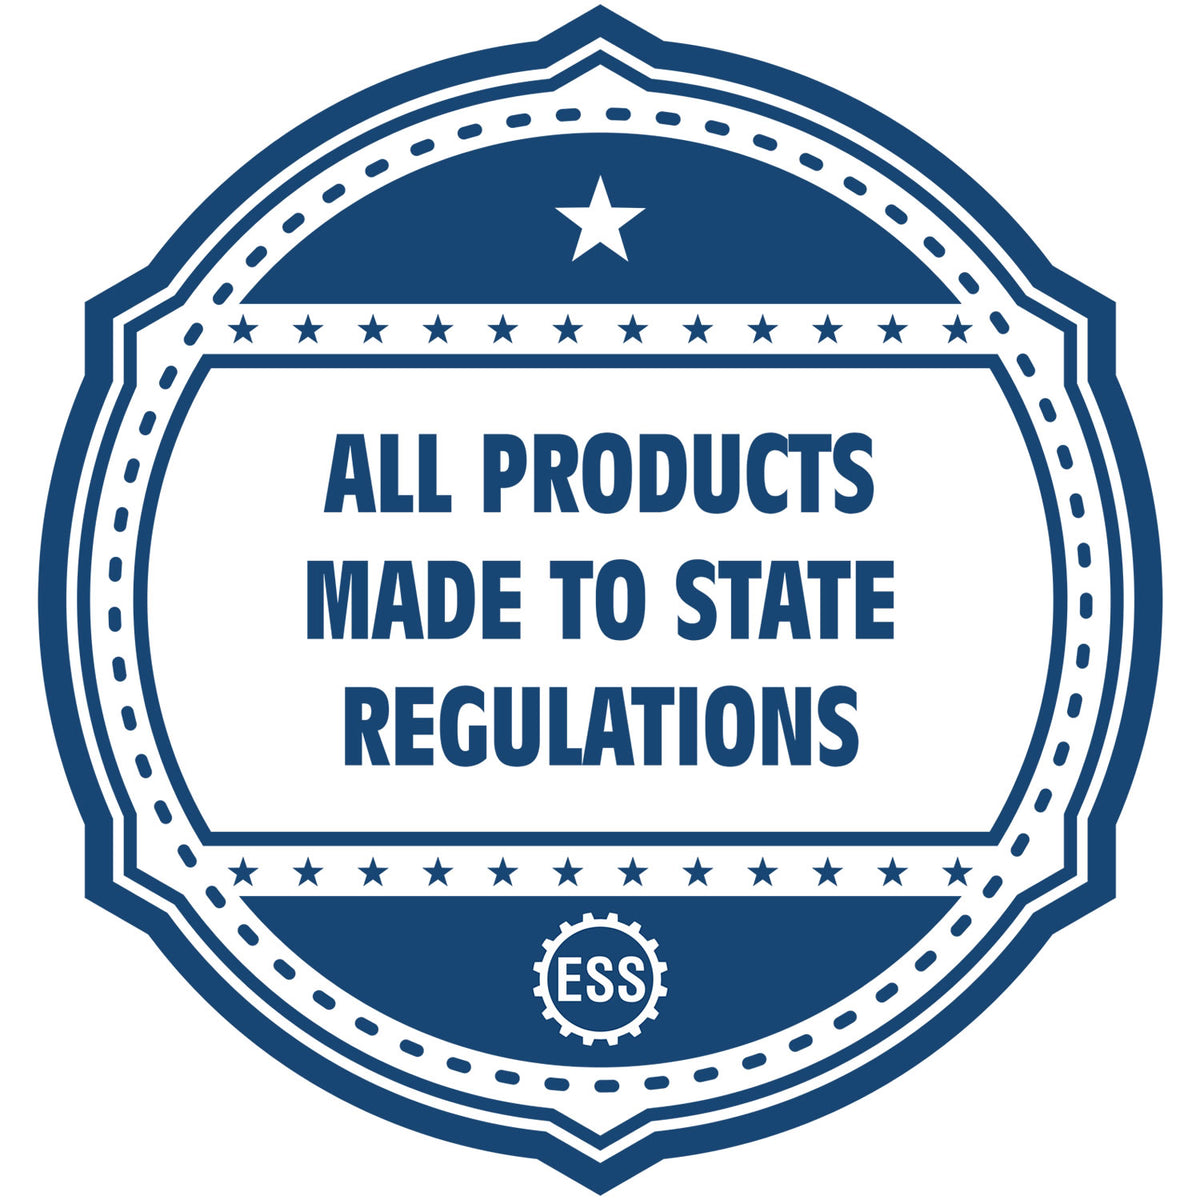 An icon or badge element for the PSI Michigan Notary Stamp showing that this product is made in compliance with state regulations.